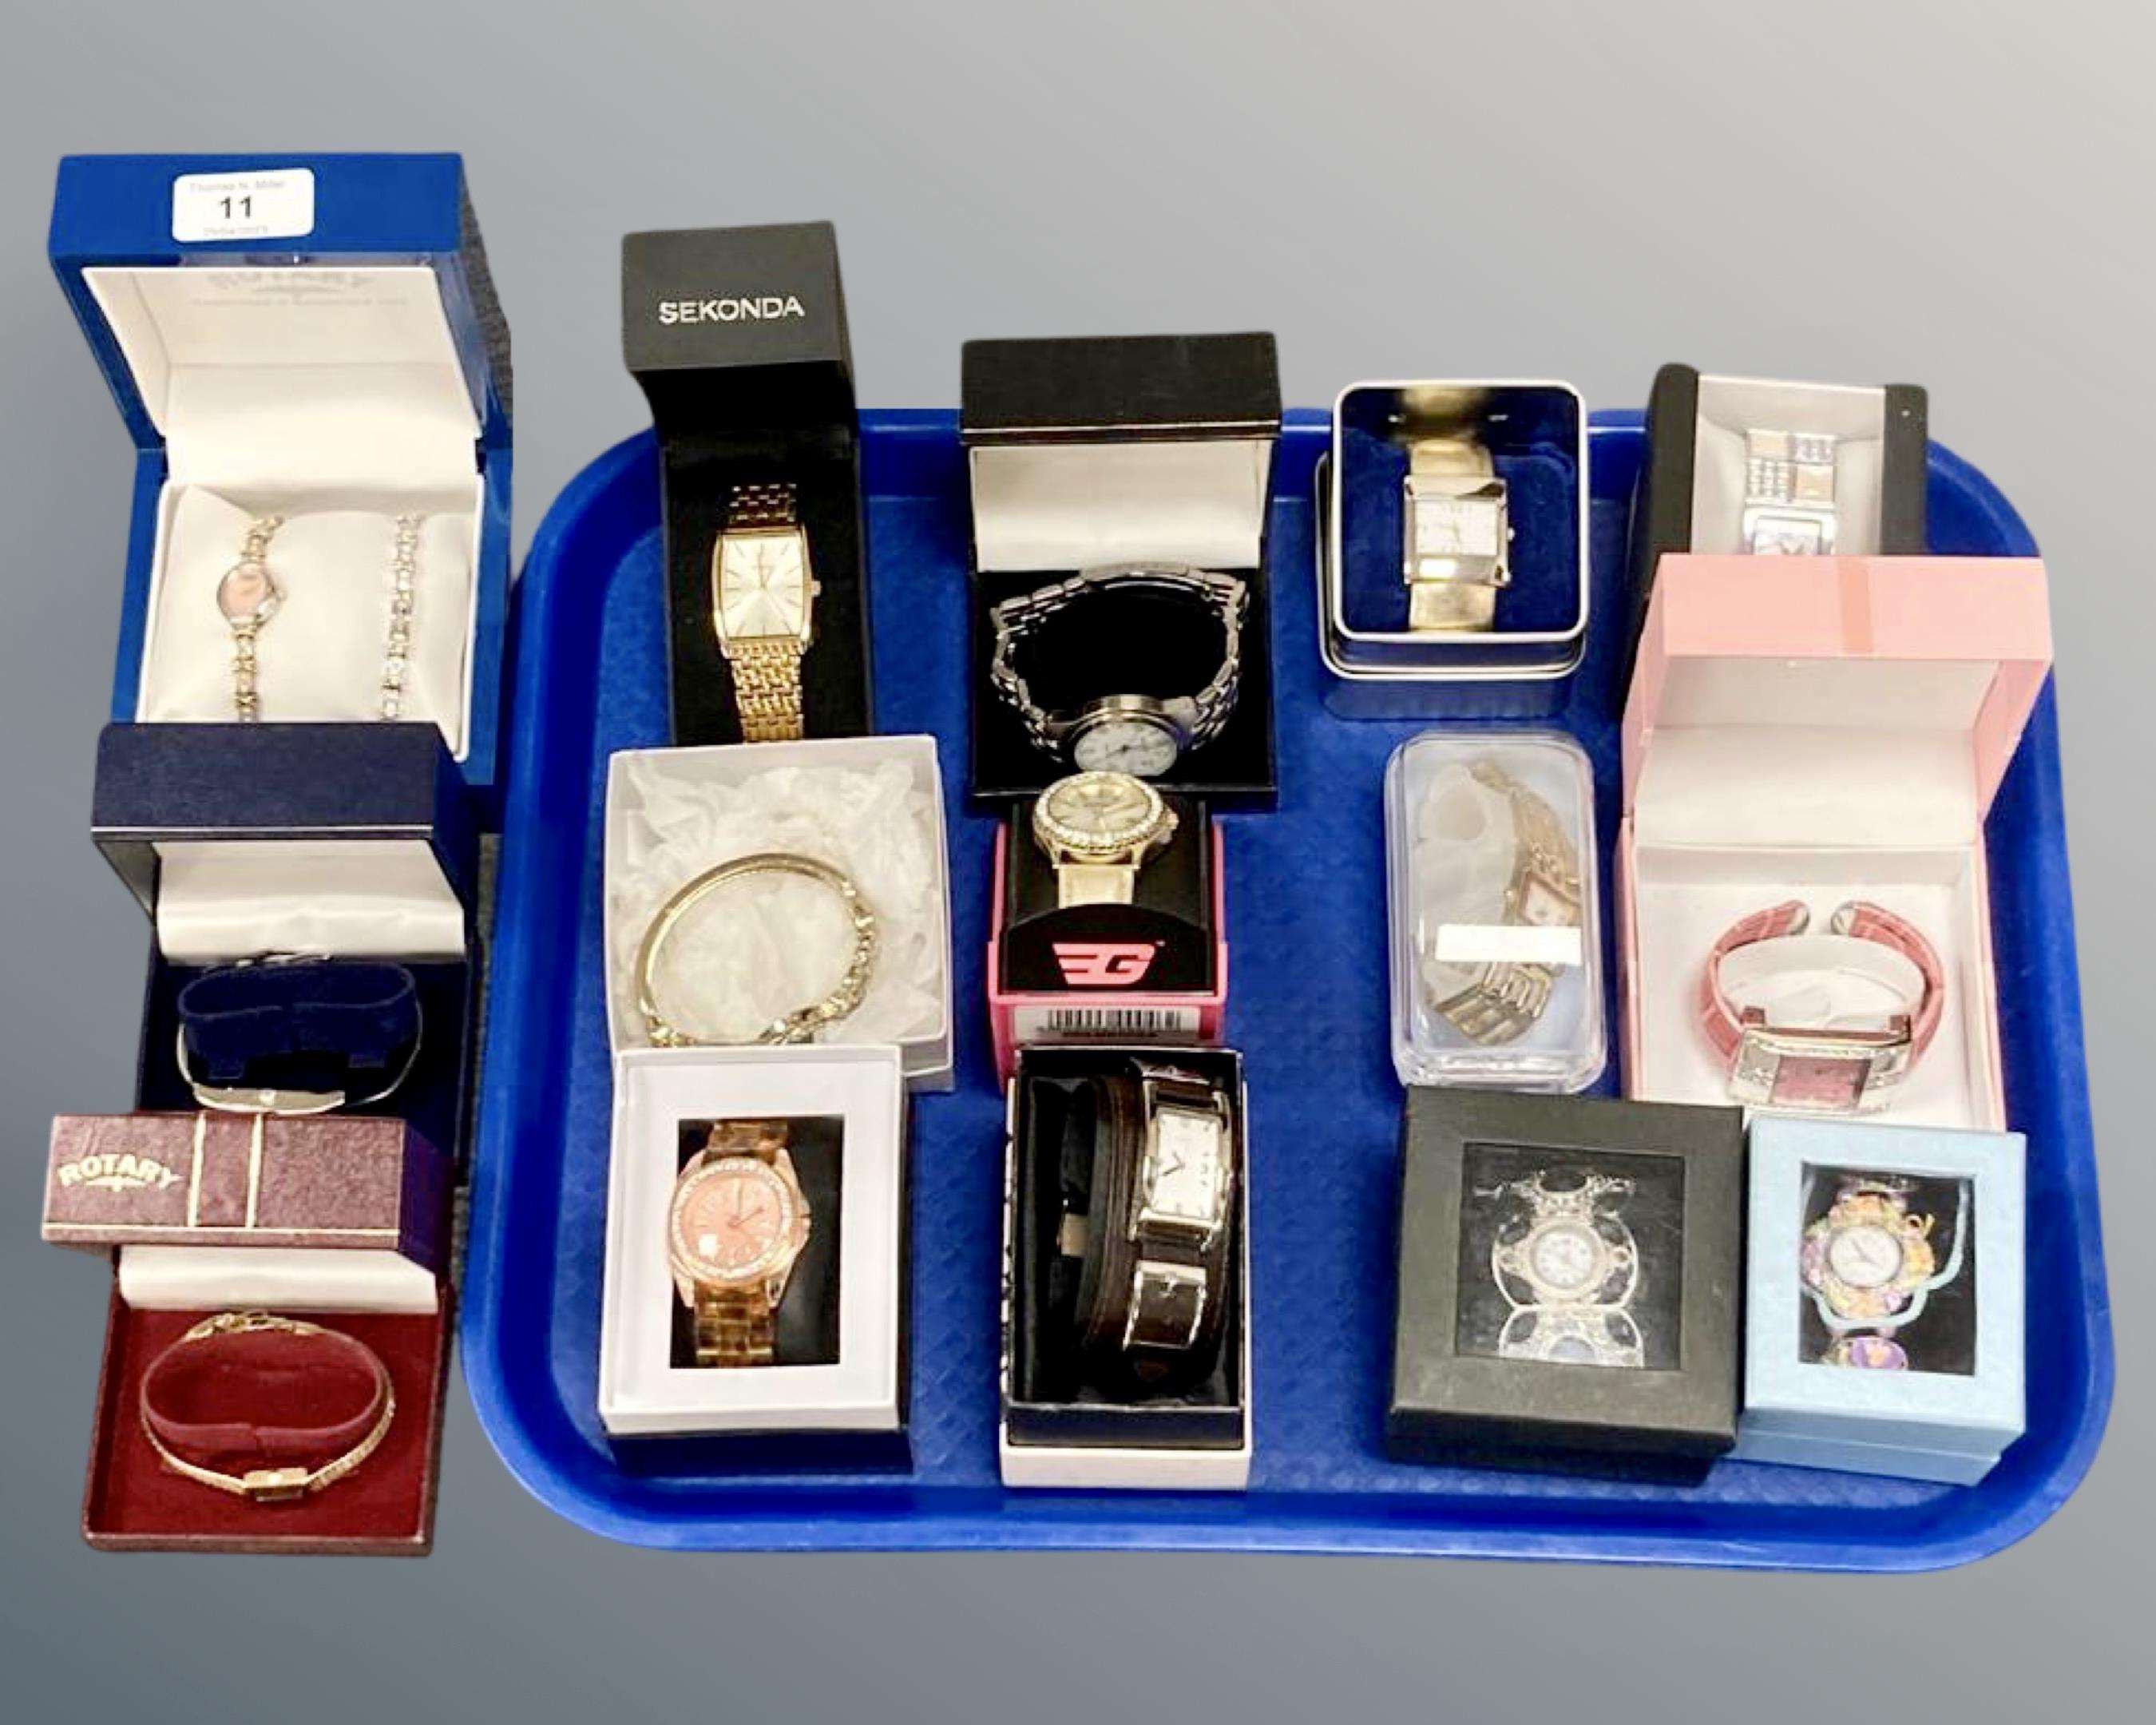 A collection of watches, Lady's and Gent's examples by Rotary, golddigga, Sekonda, Oasis etc.